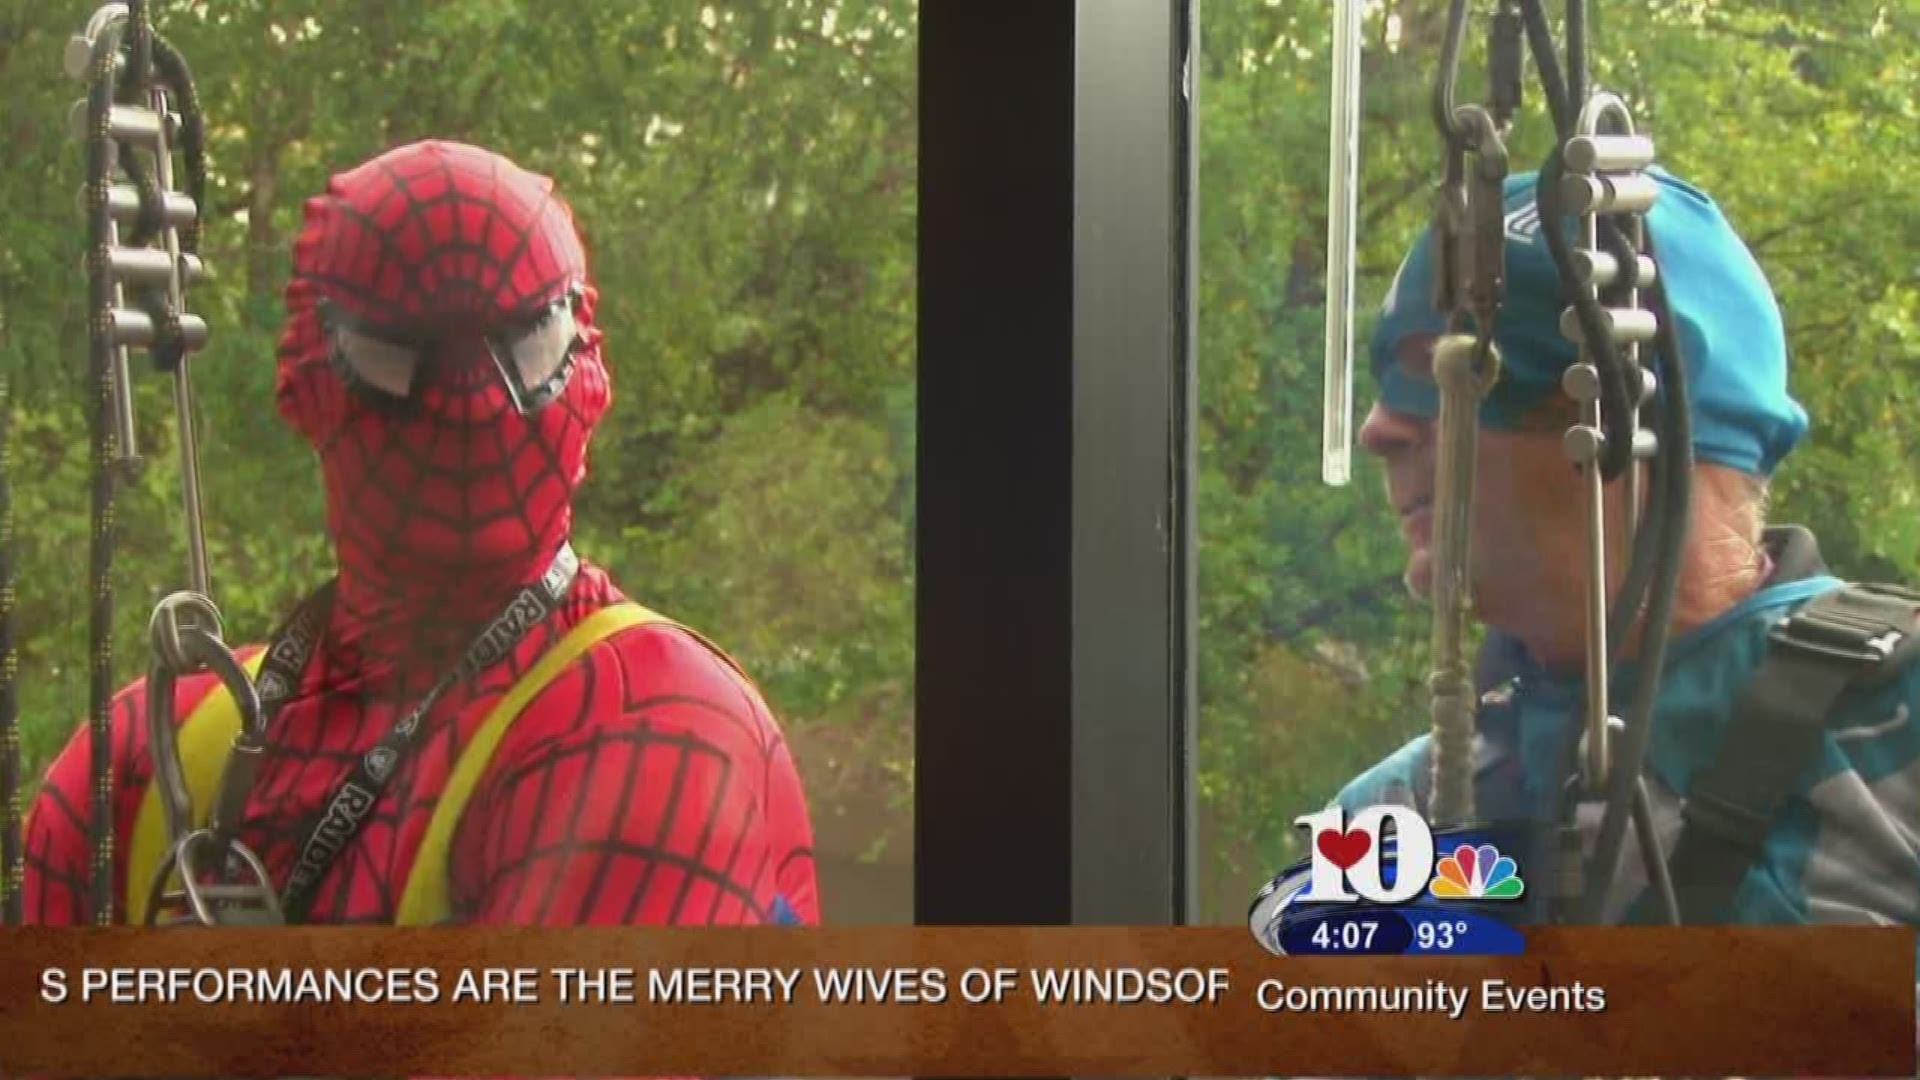 July 26, 2016Live at Five at 4A window washing team from Asheville dress up as super heroes to entertain kids at East Tennessee Children's Hospital.